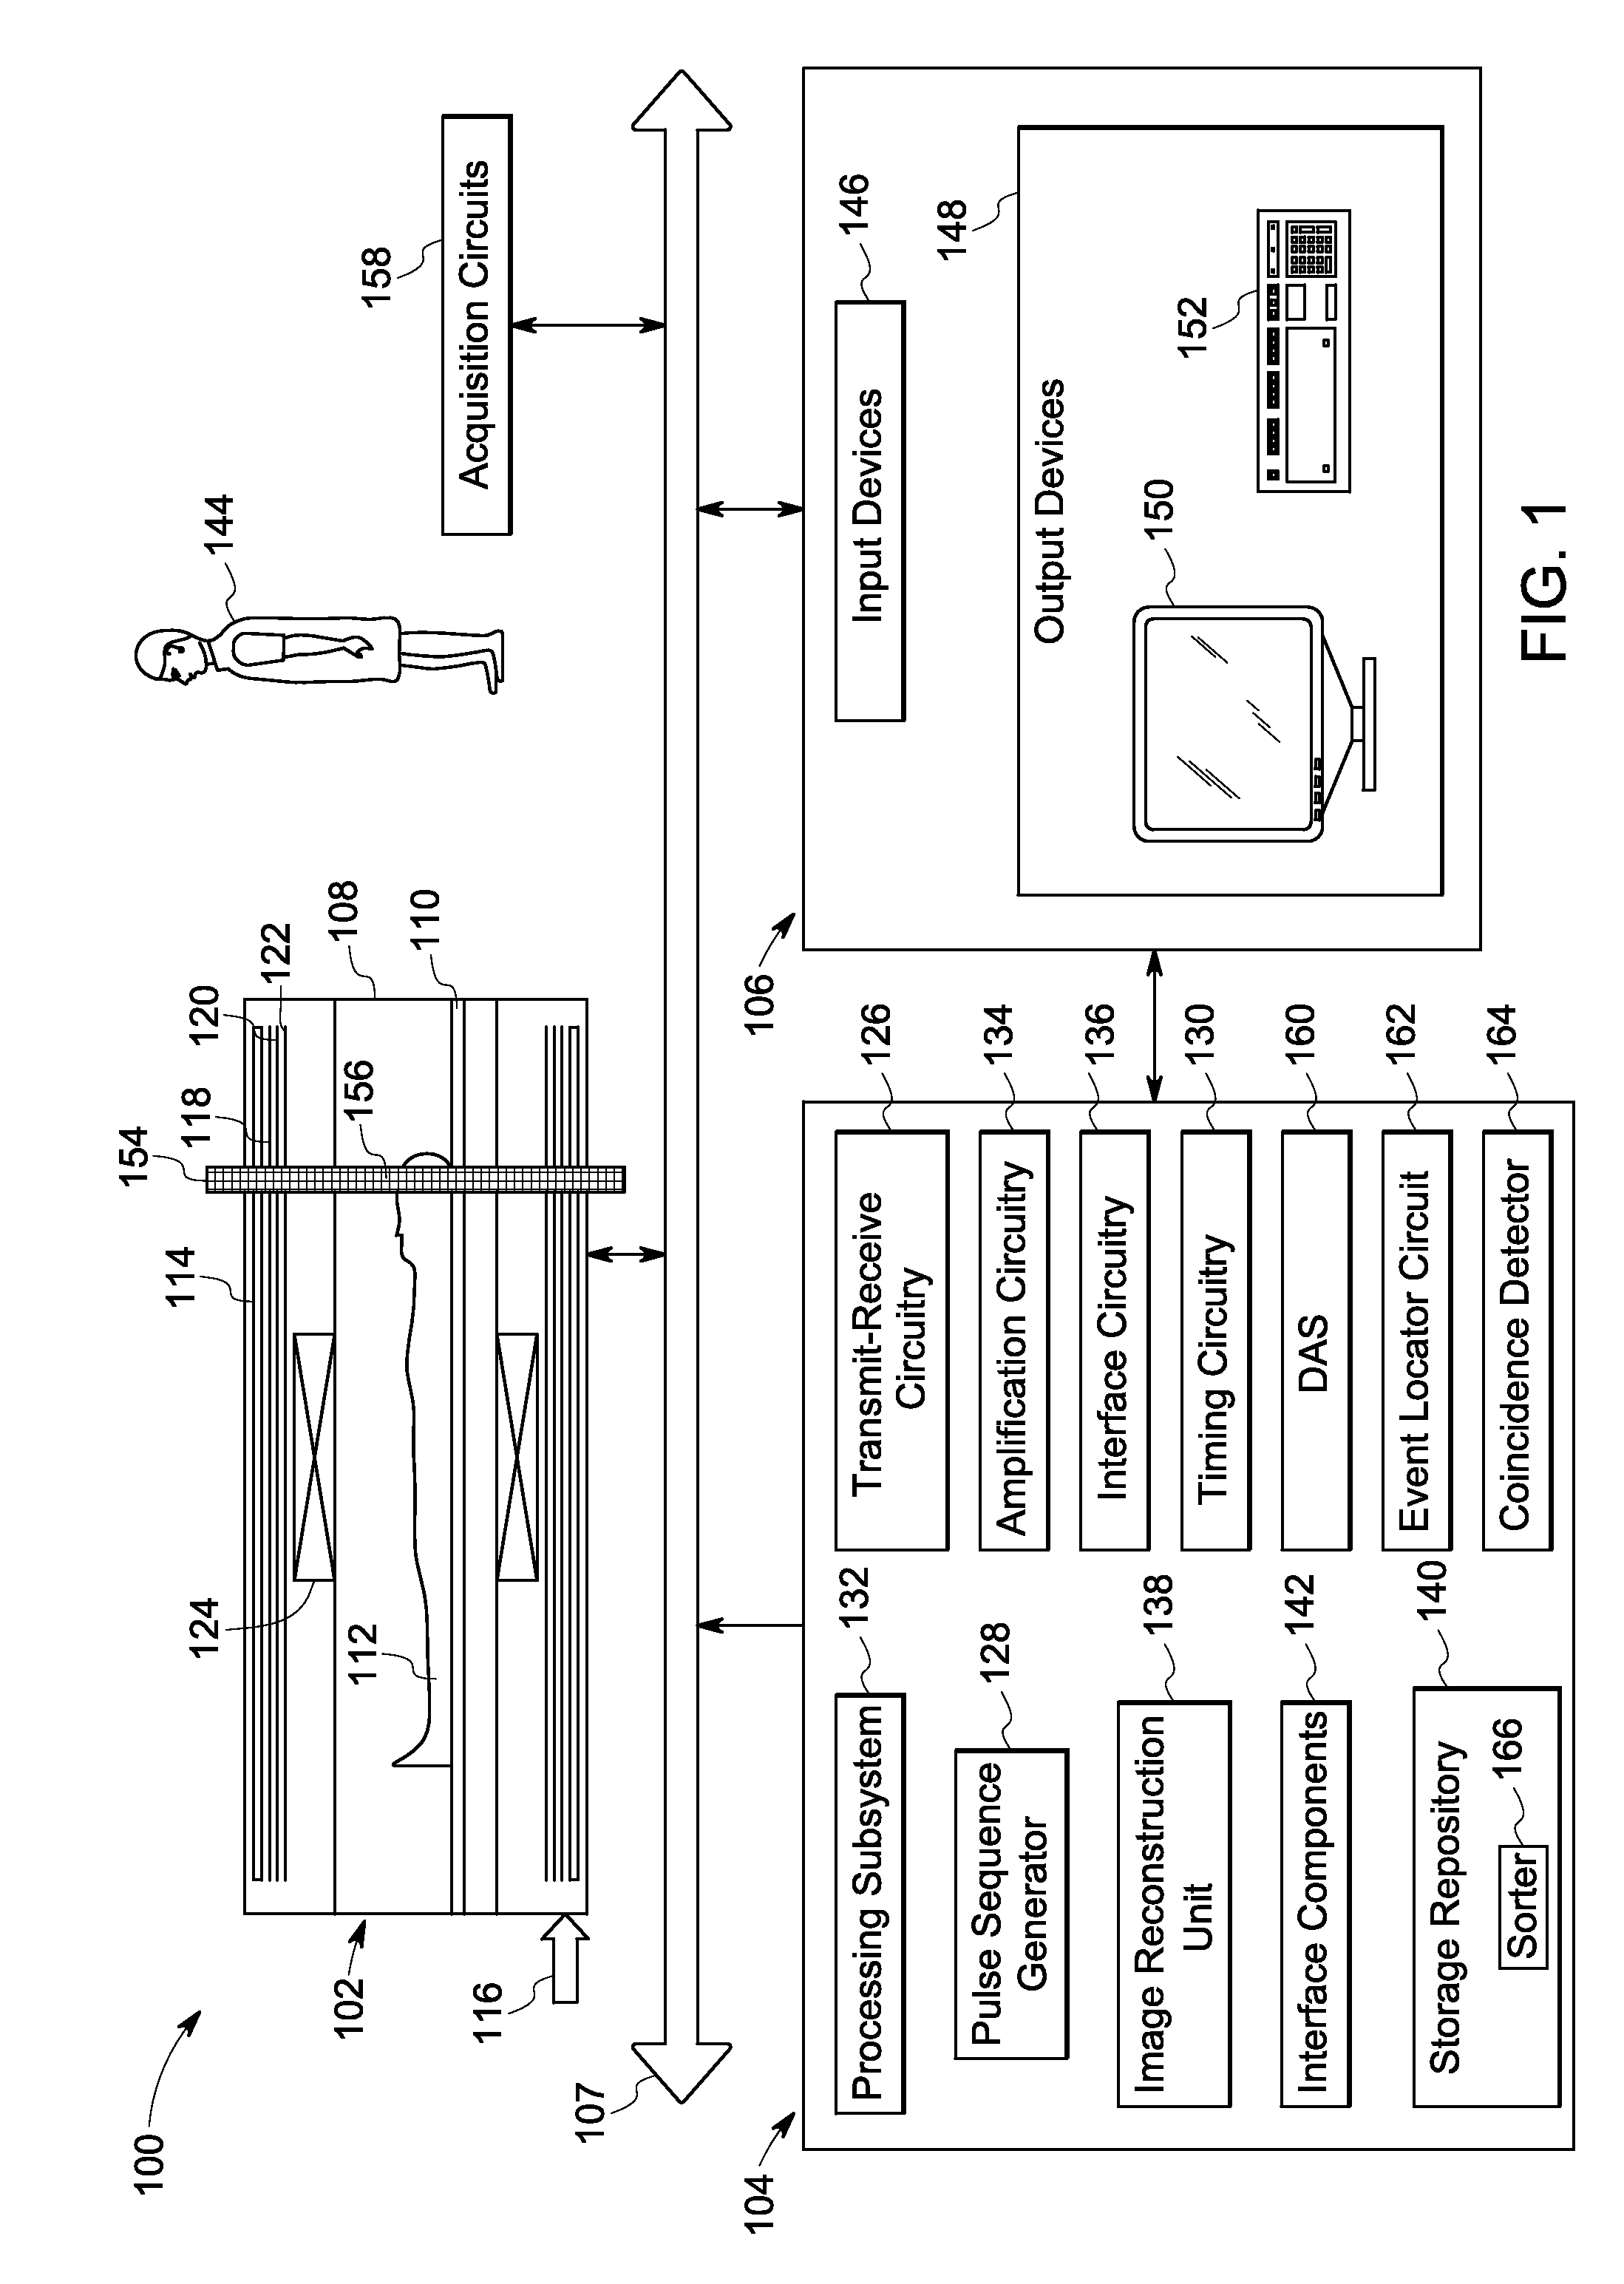 Joint estimation of attenuation and activity information using emission data